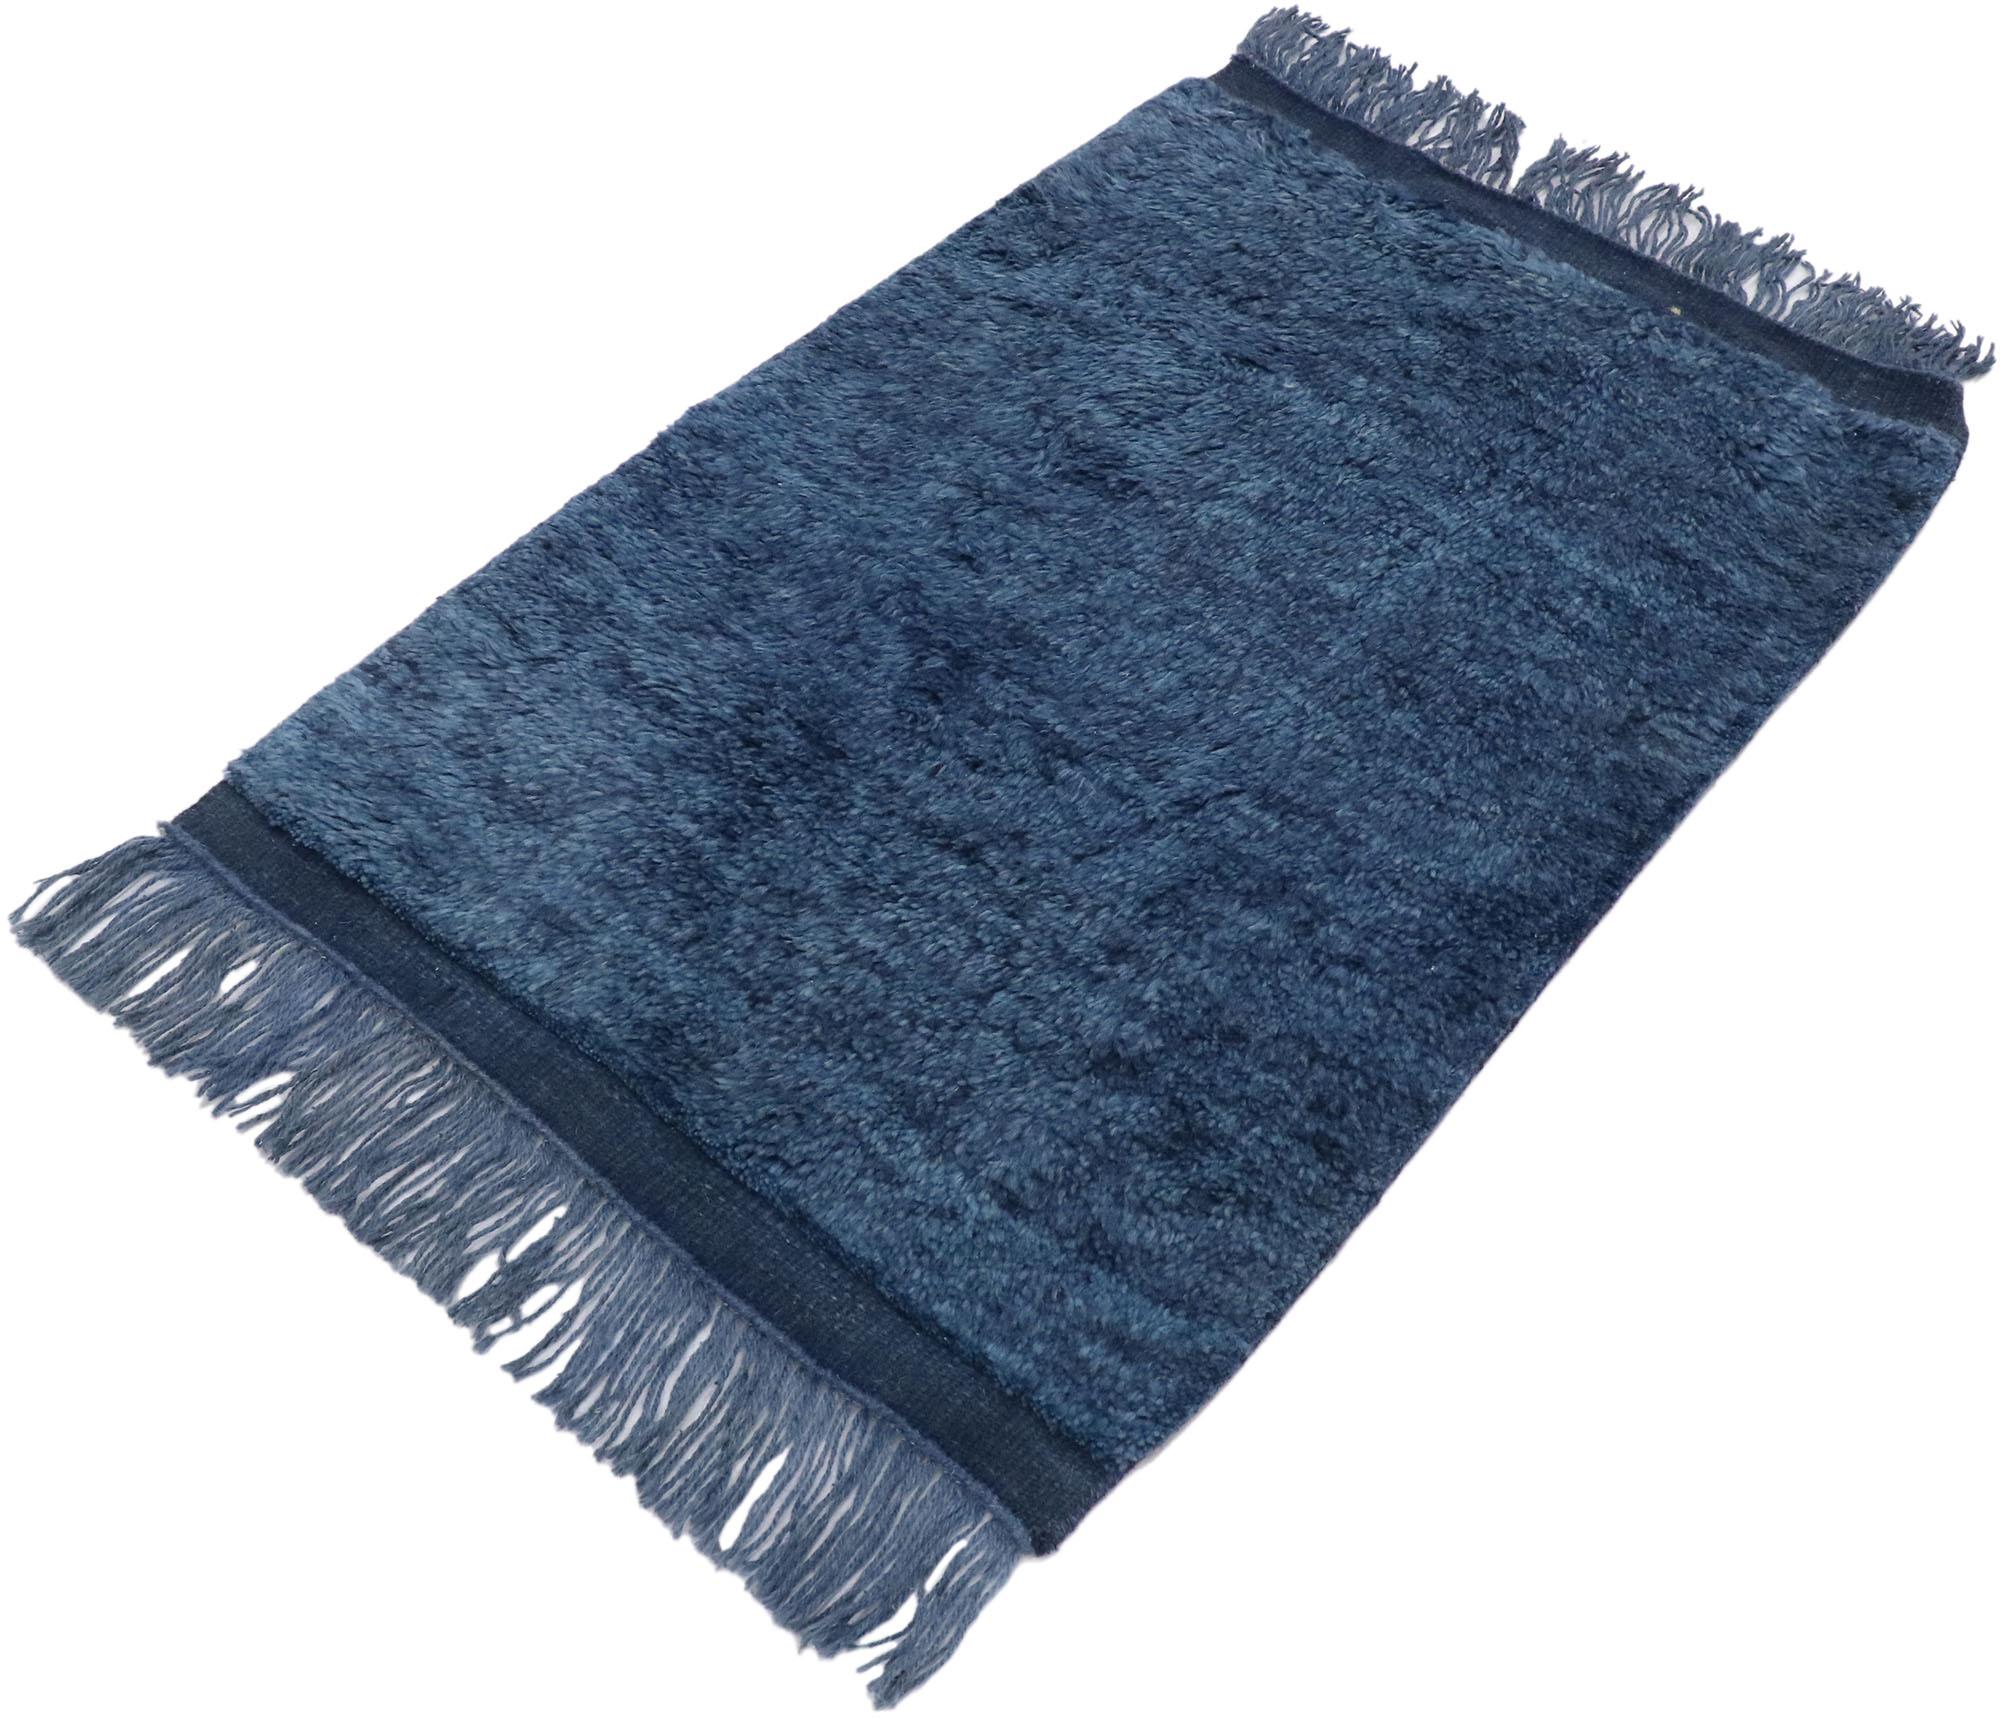 30601 Small Blue Moroccan Rug, 02'02 x 03'04. Modern Indian Moroccan rugs are contemporary interpretations of traditional Moroccan rug designs, often crafted in India. These rugs draw inspiration from the iconic motifs and patterns found in